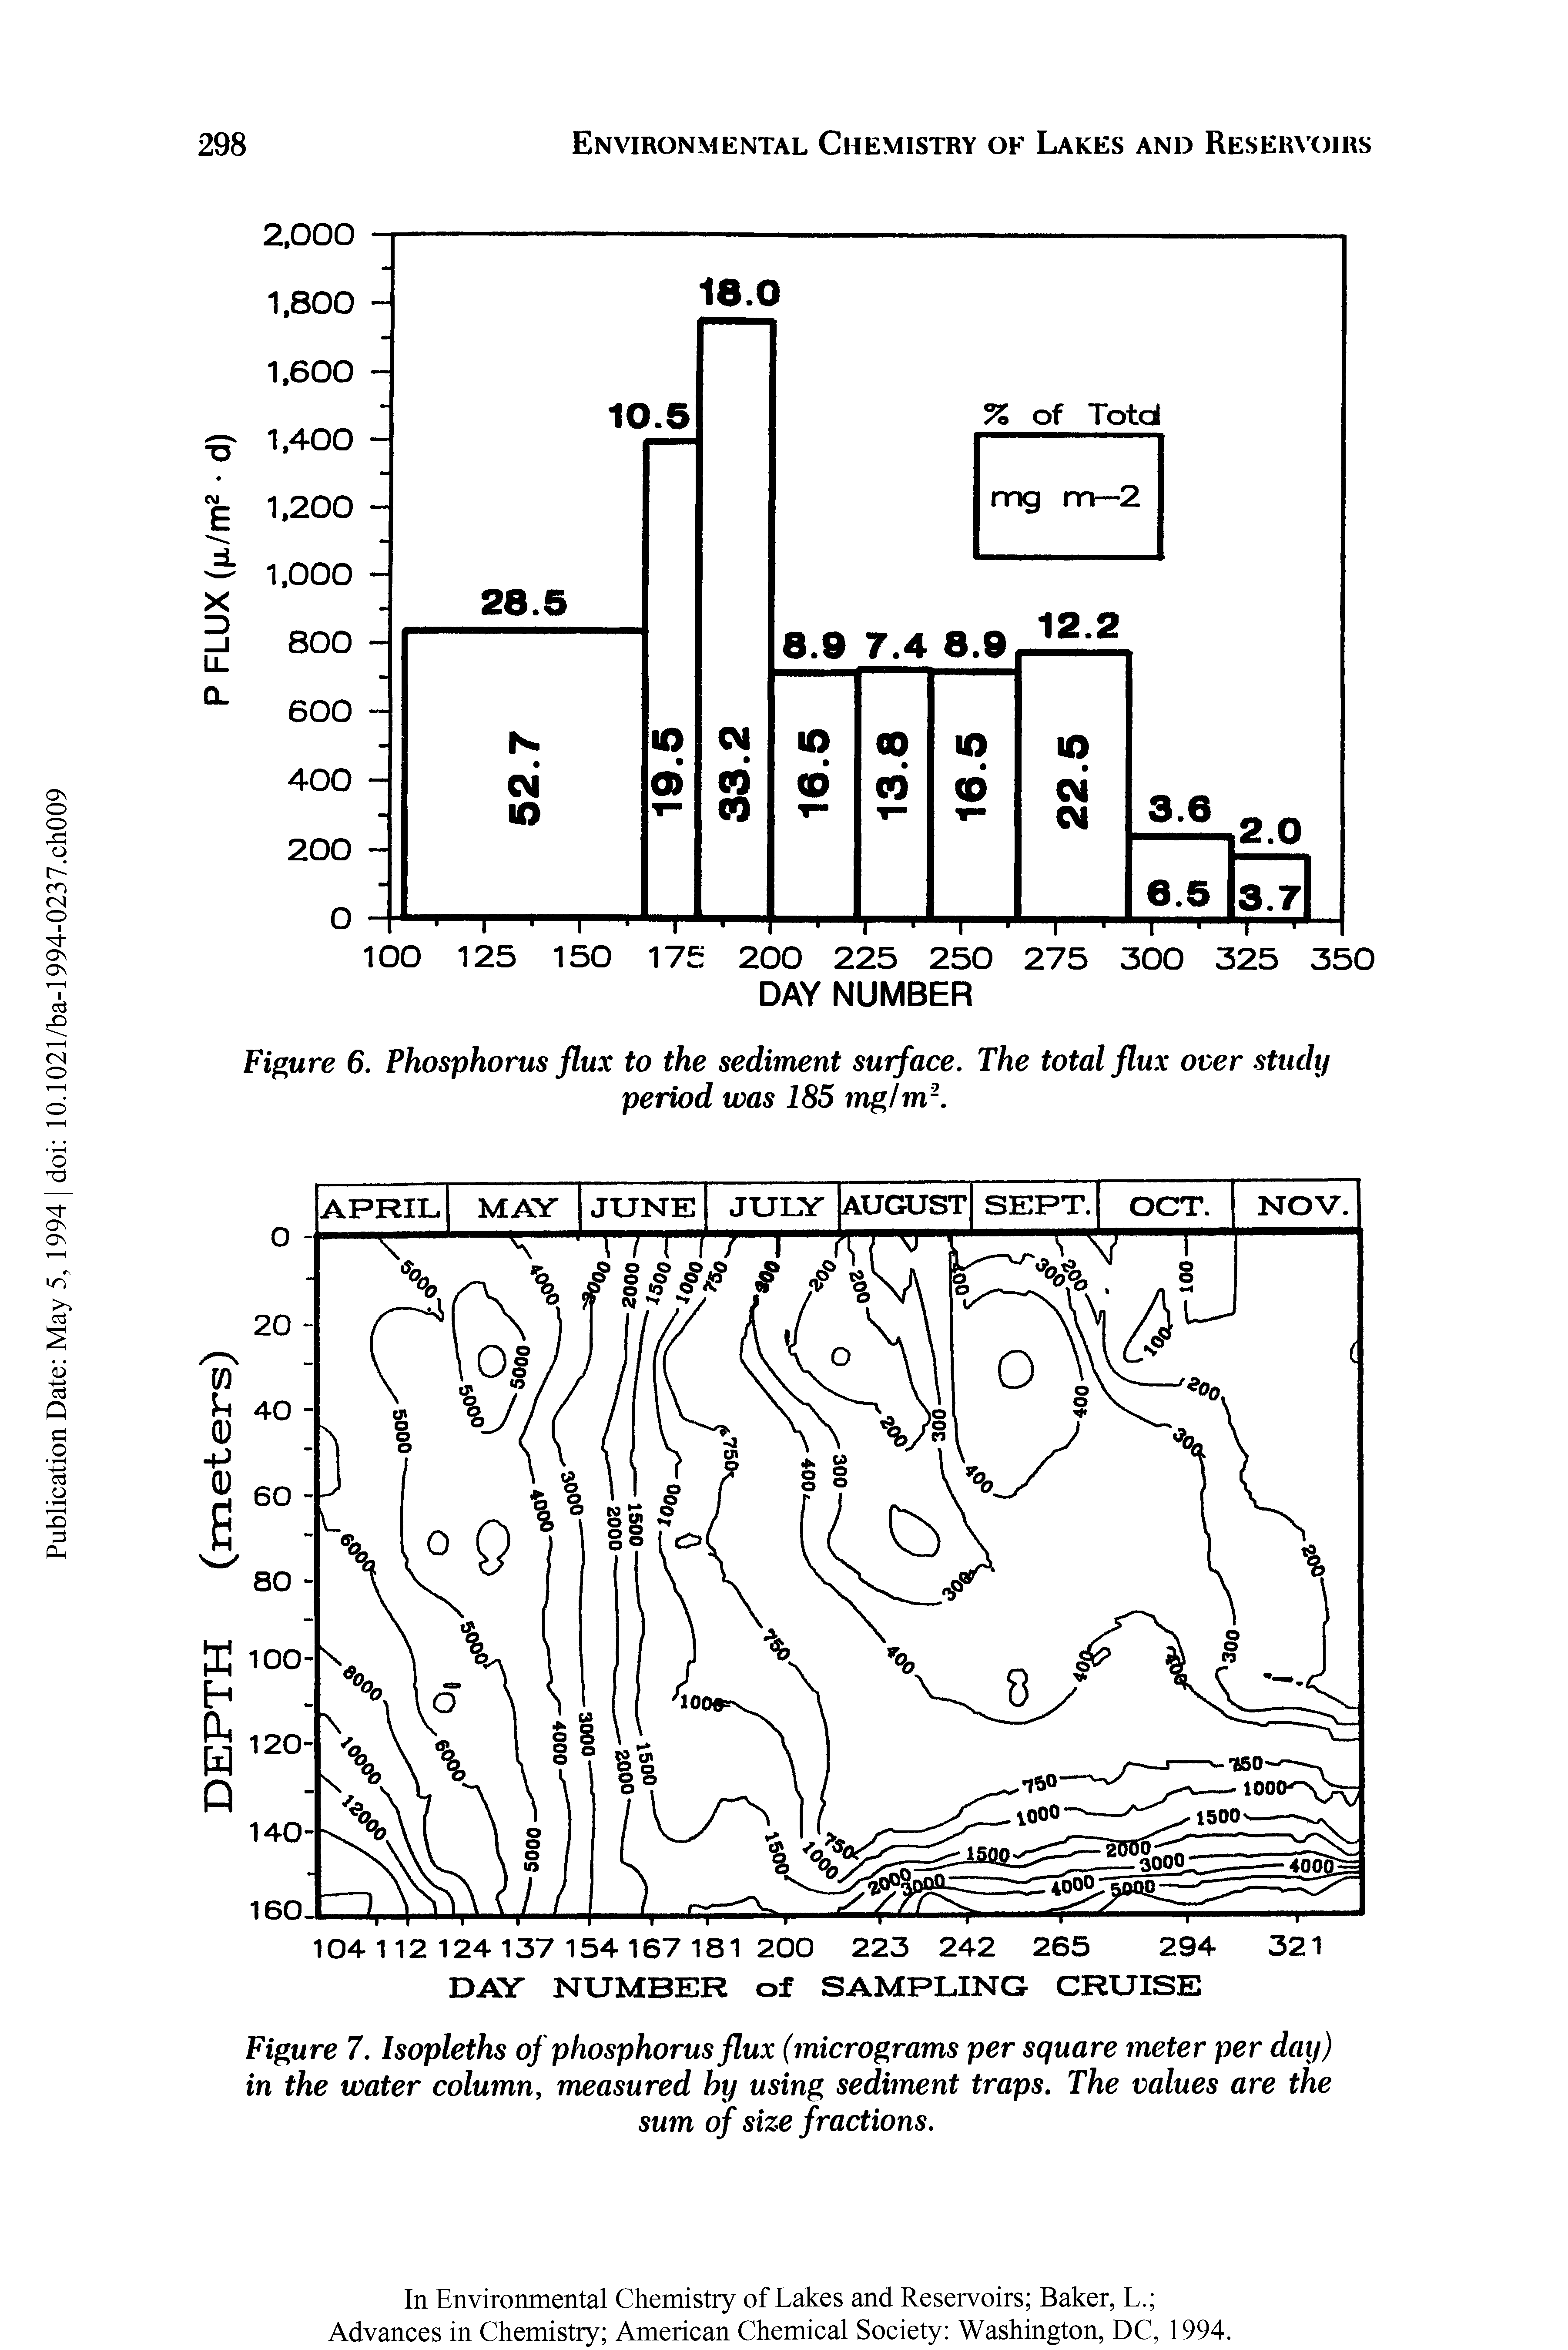 Figure 6. Phosphorus flux to the sediment surface. The total flux over study period was 185 mg/m2.